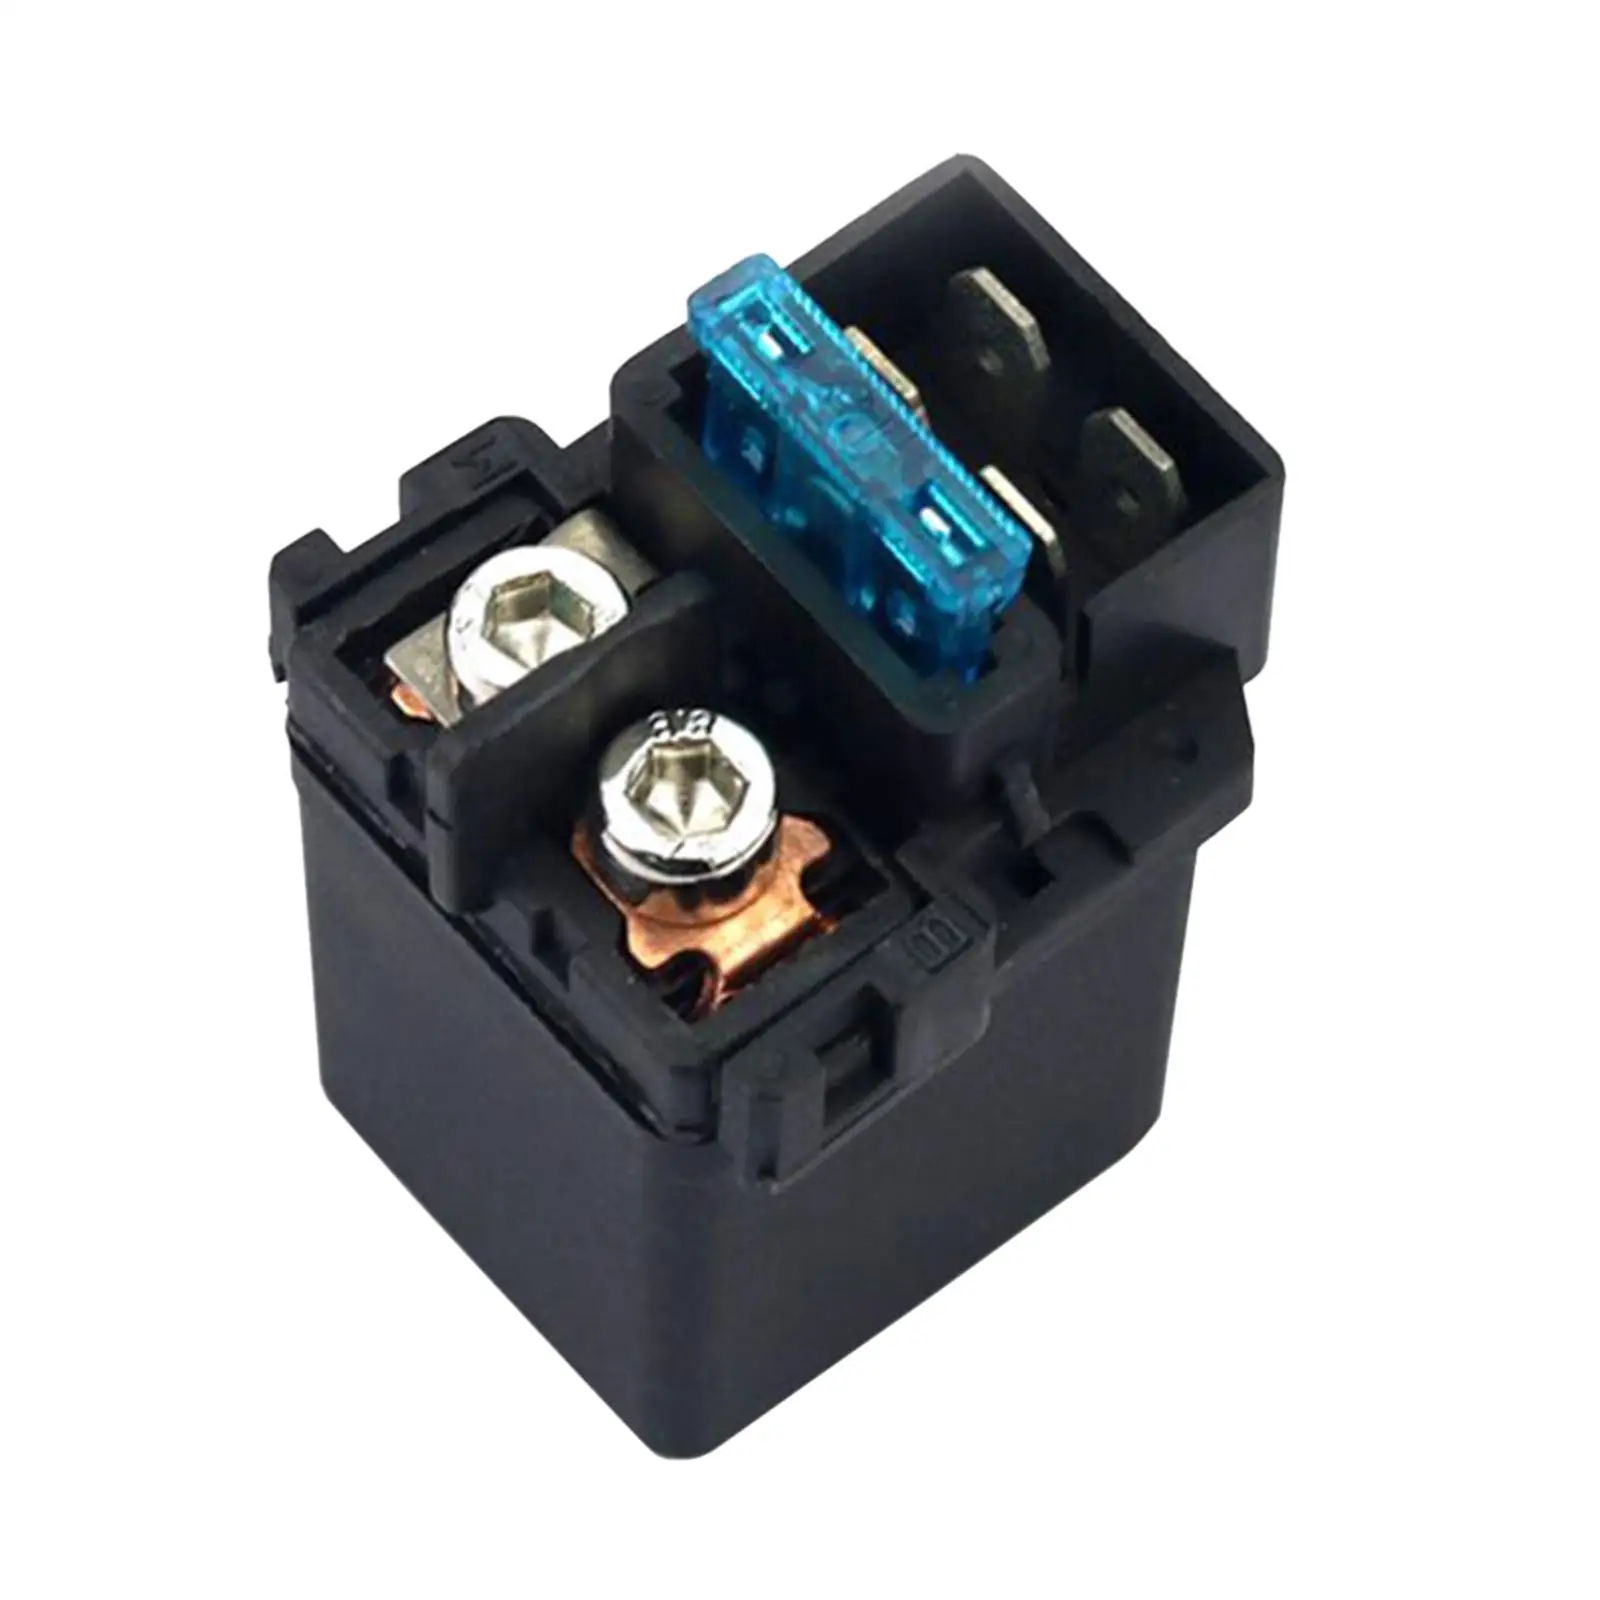 Starter Relay Solenoid Voltage Starter Relay Replacement for Yamaha FZ 16